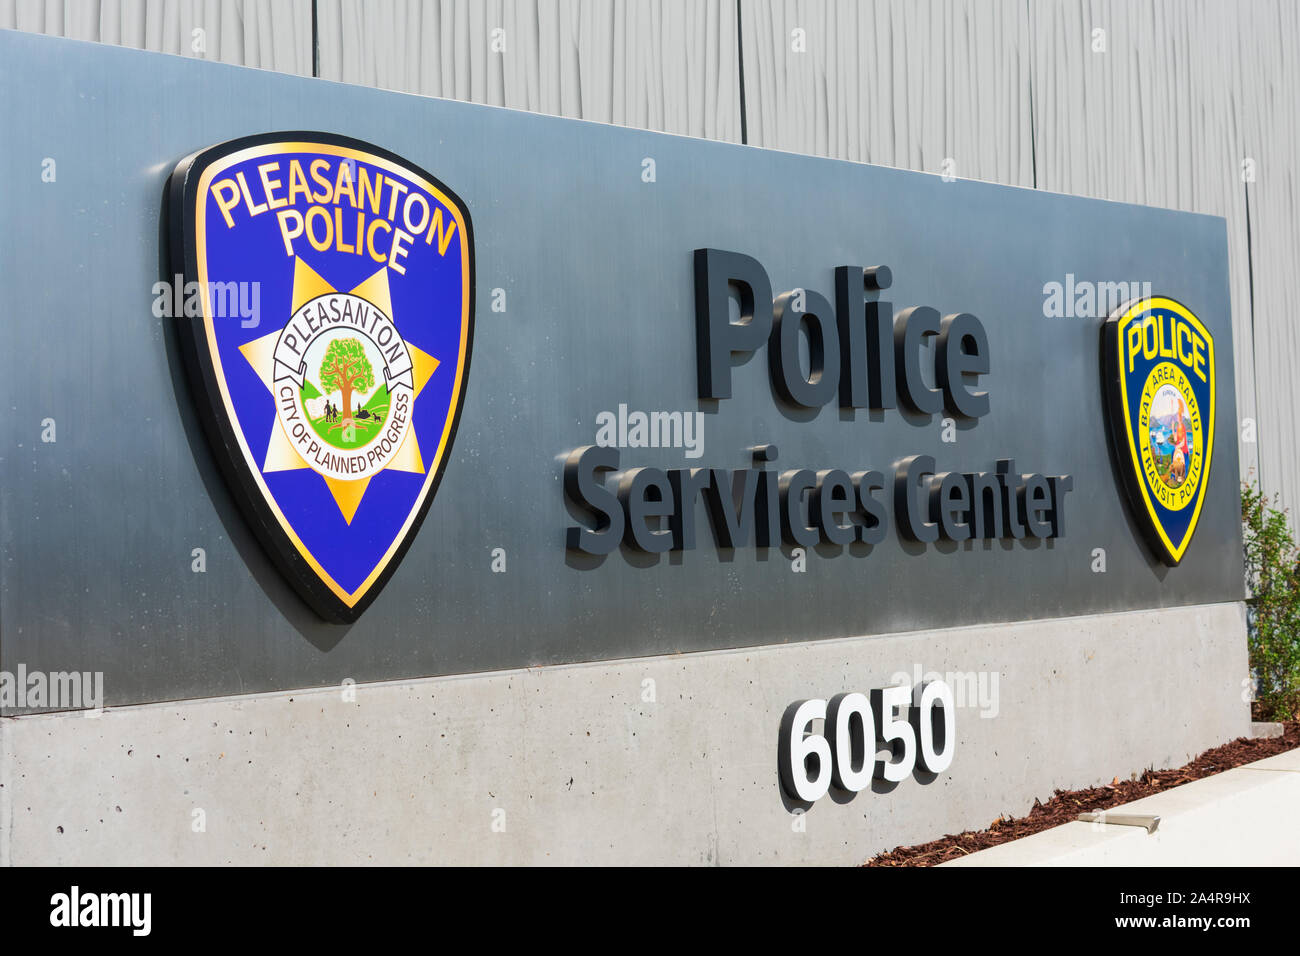 Pleasanton police and Bay Area Rapid Transit police sign at police service center near West Dublin/Pleasanton BART station of Bay Area Rapid Transit Stock Photo